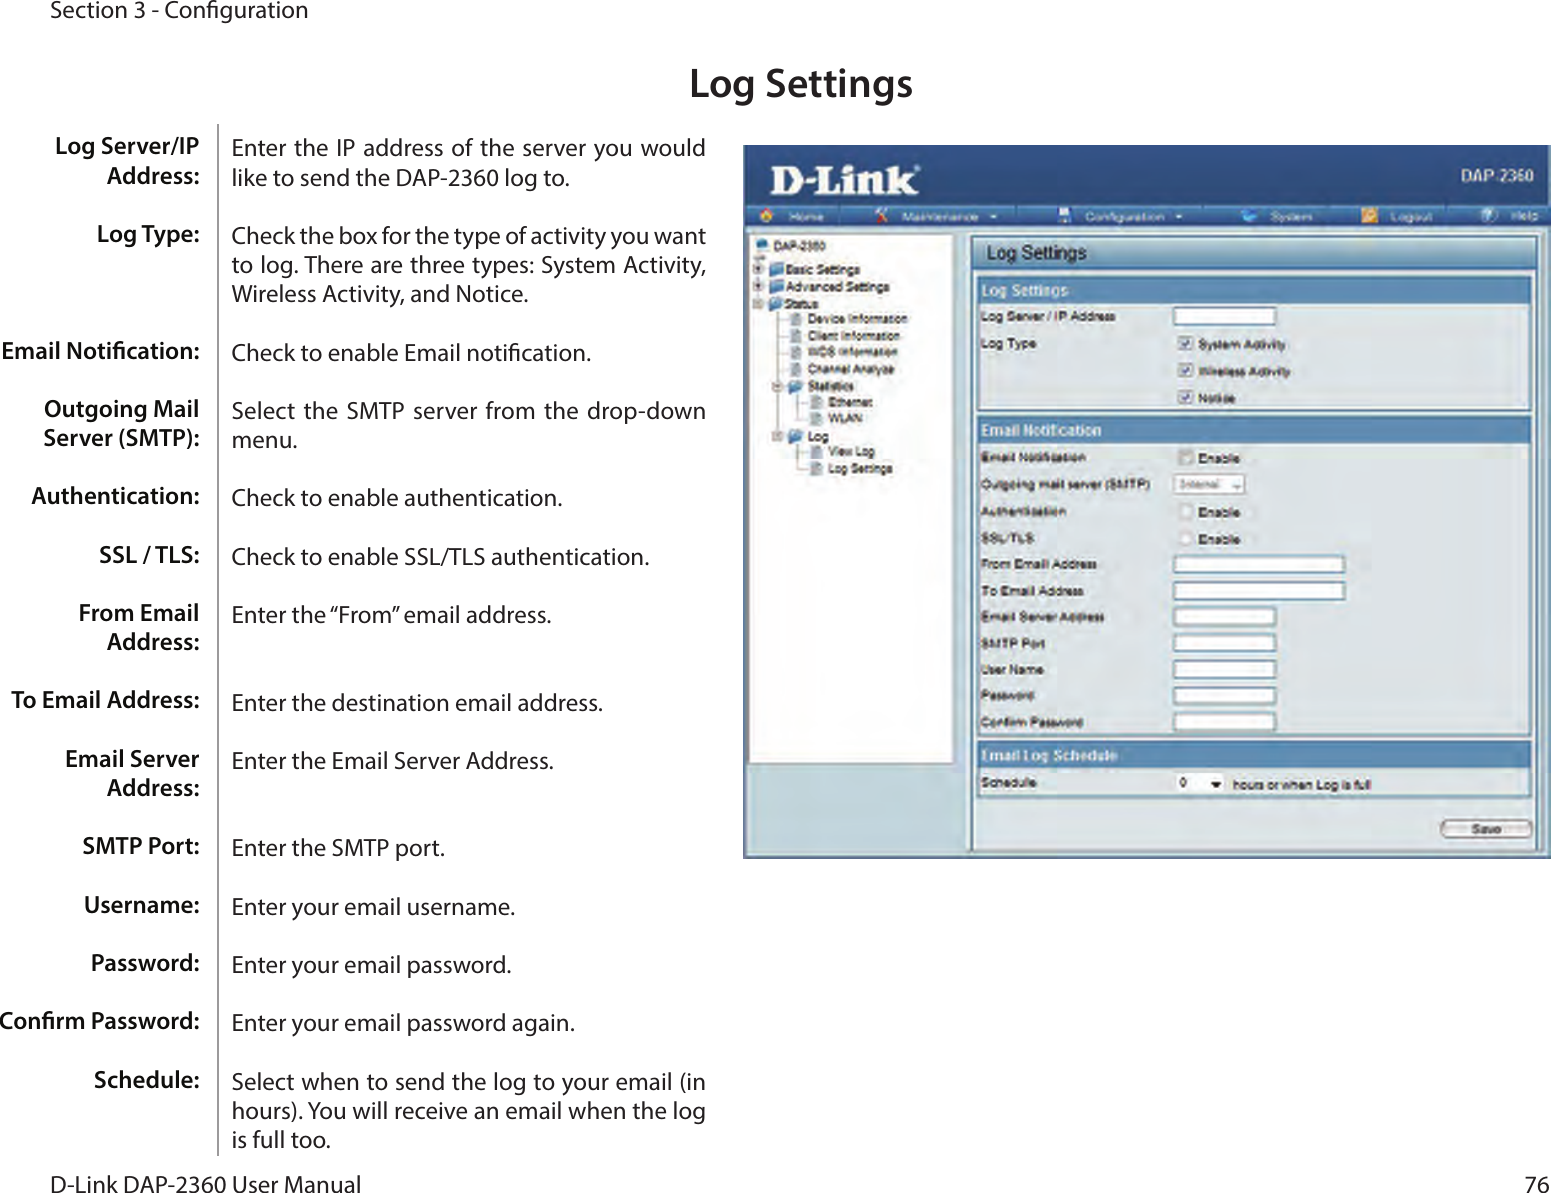 76D-Link DAP-2360 User ManualSection 3 - CongurationLog SettingsEnter the IP address of the server you would like to send the DAP-2360 log to.Check the box for the type of activity you want to log. There are three types: System Activity, Wireless Activity, and Notice.Check to enable Email notication.Select  the SMTP server from the drop-down menu.Check to enable authentication.Check to enable SSL/TLS authentication.Enter the “From” email address.Enter the destination email address.Enter the Email Server Address.Enter the SMTP port.Enter your email username.Enter your email password.Enter your email password again.Select when to send the log to your email (in hours). You will receive an email when the log is full too.Log Server/IP Address:Log Type:Email Notication:Outgoing Mail Server (SMTP):Authentication:SSL / TLS:From Email Address:To Email Address:Email Server Address:SMTP Port:Username:Password:Conrm Password:Schedule: